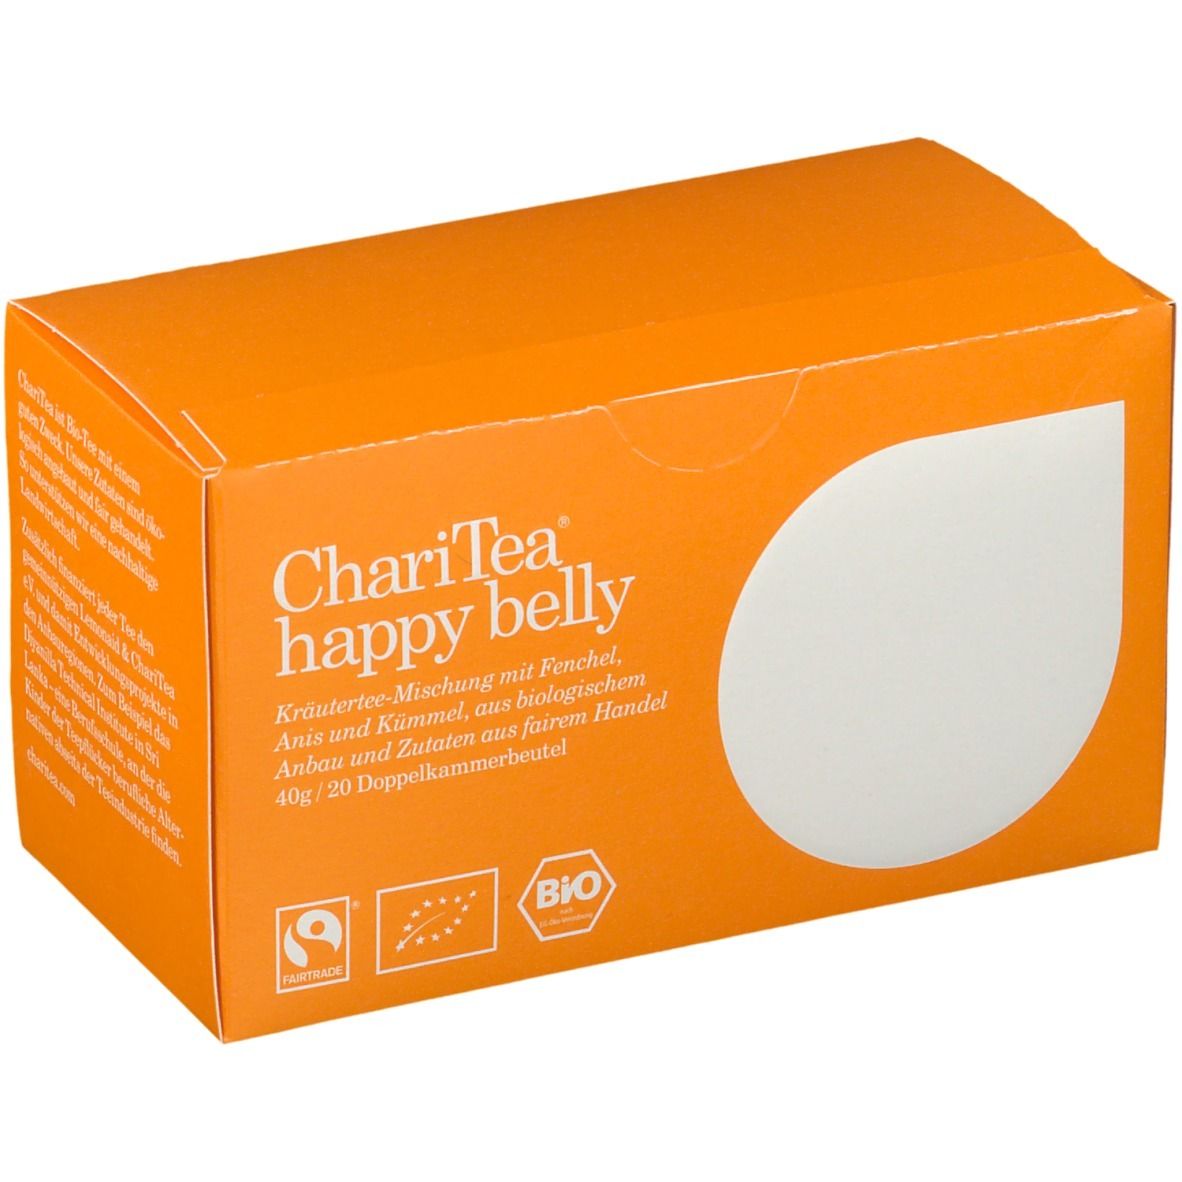 Image of ChariTea® happy belly